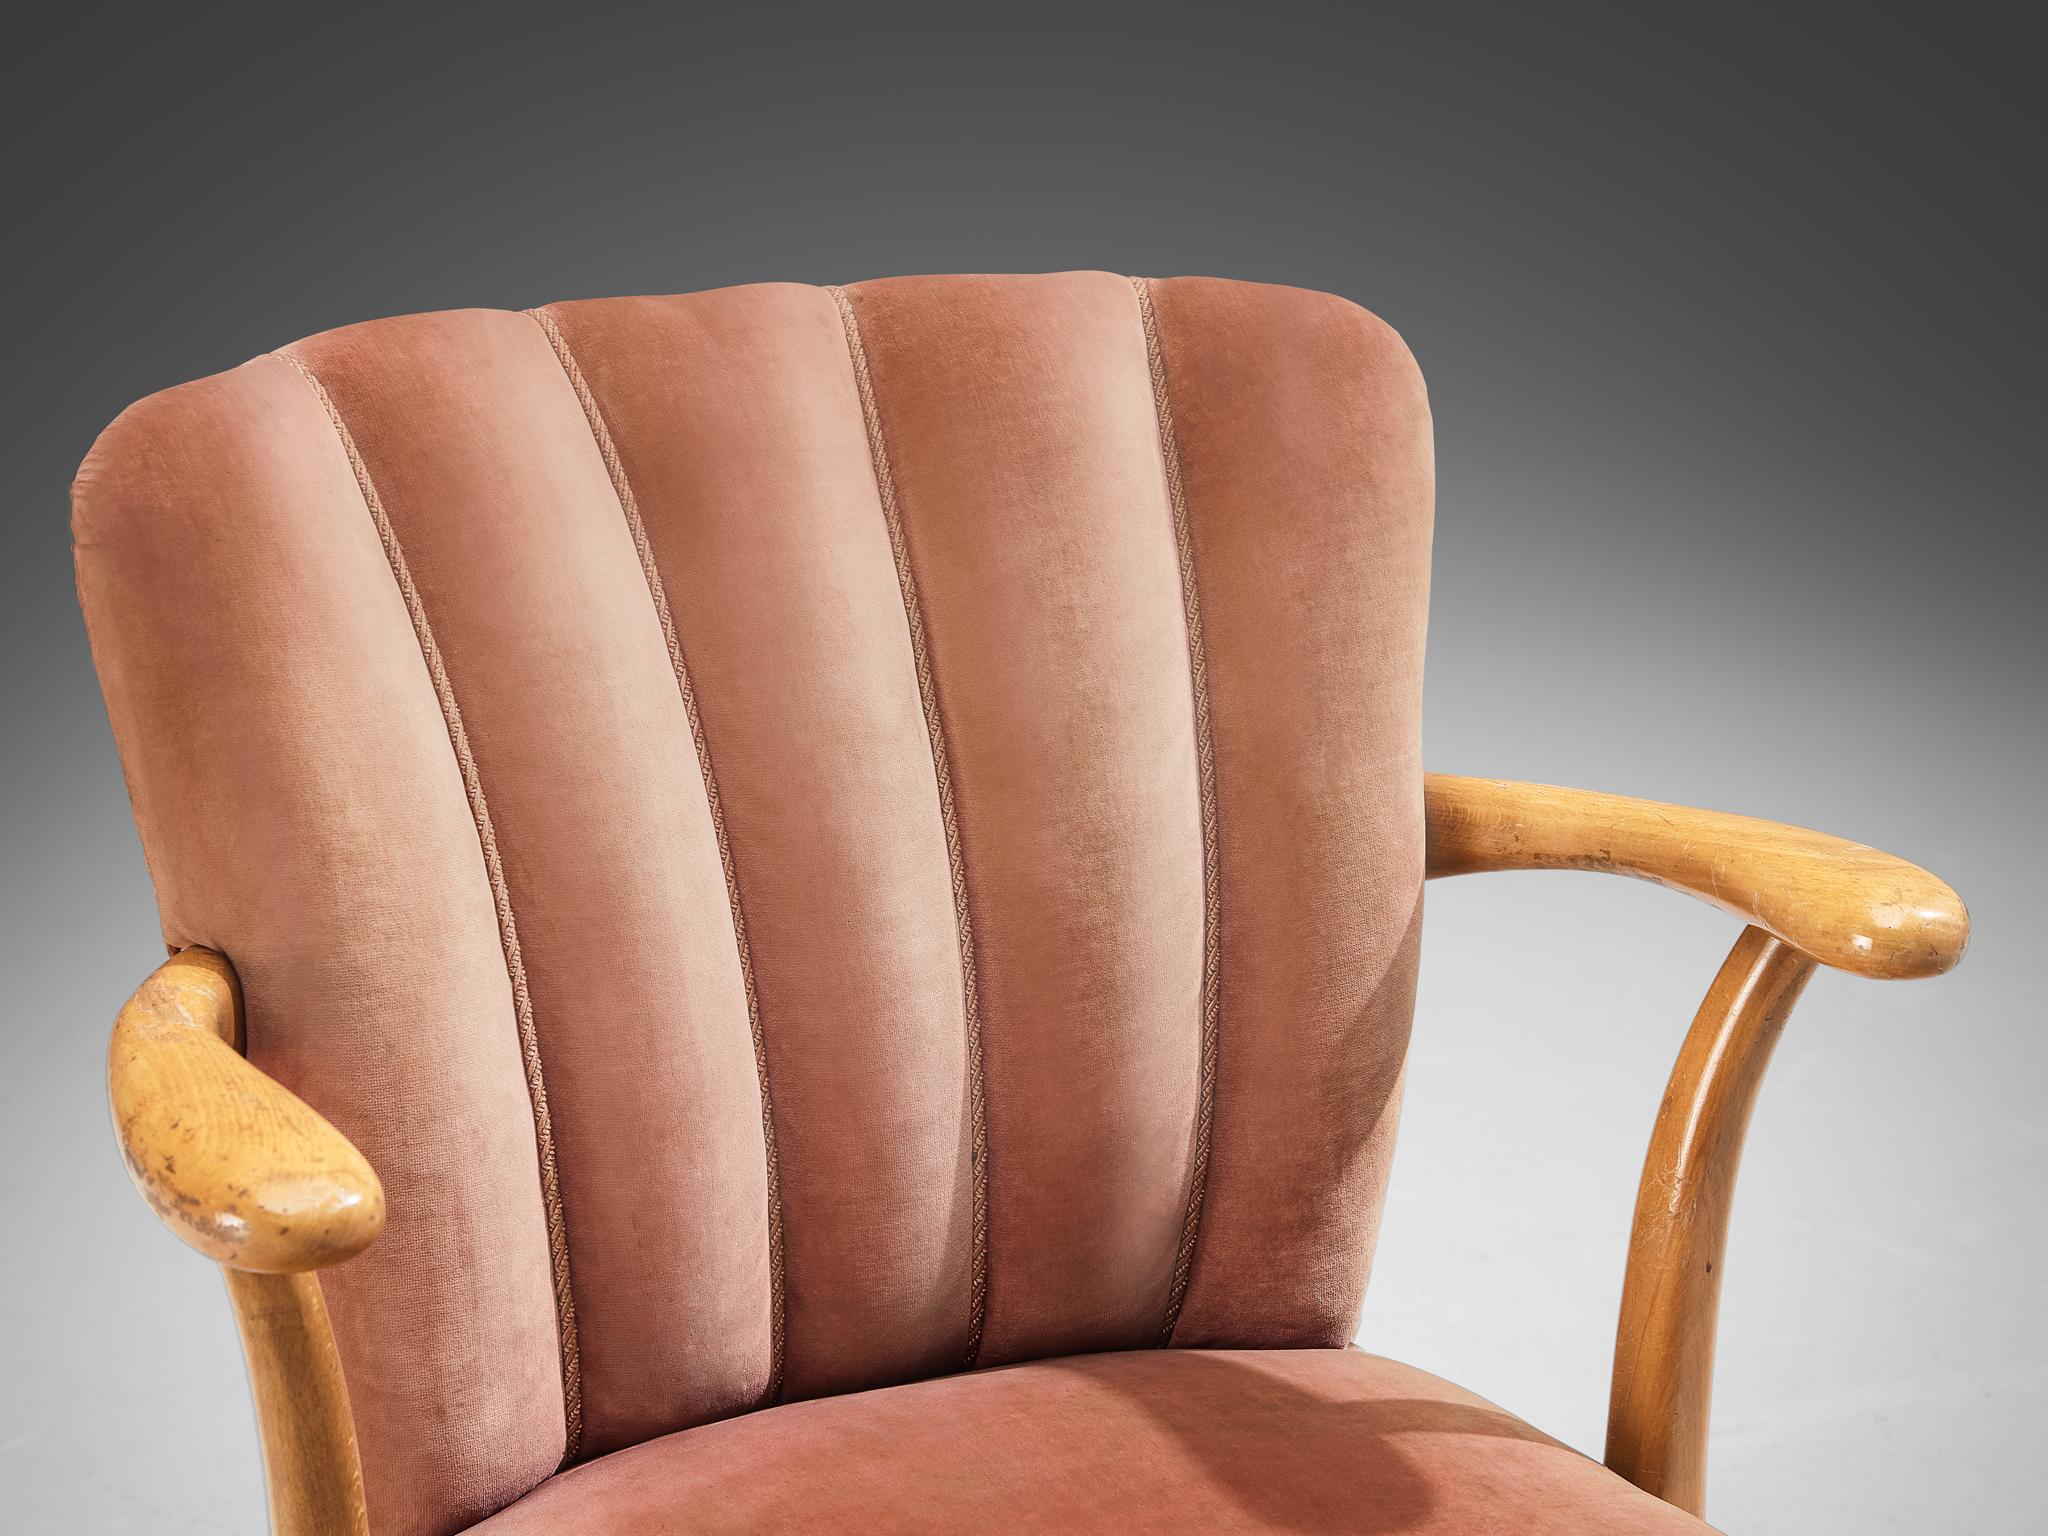 European Armchair in Soft Pink Velvet Upholstery and Wood